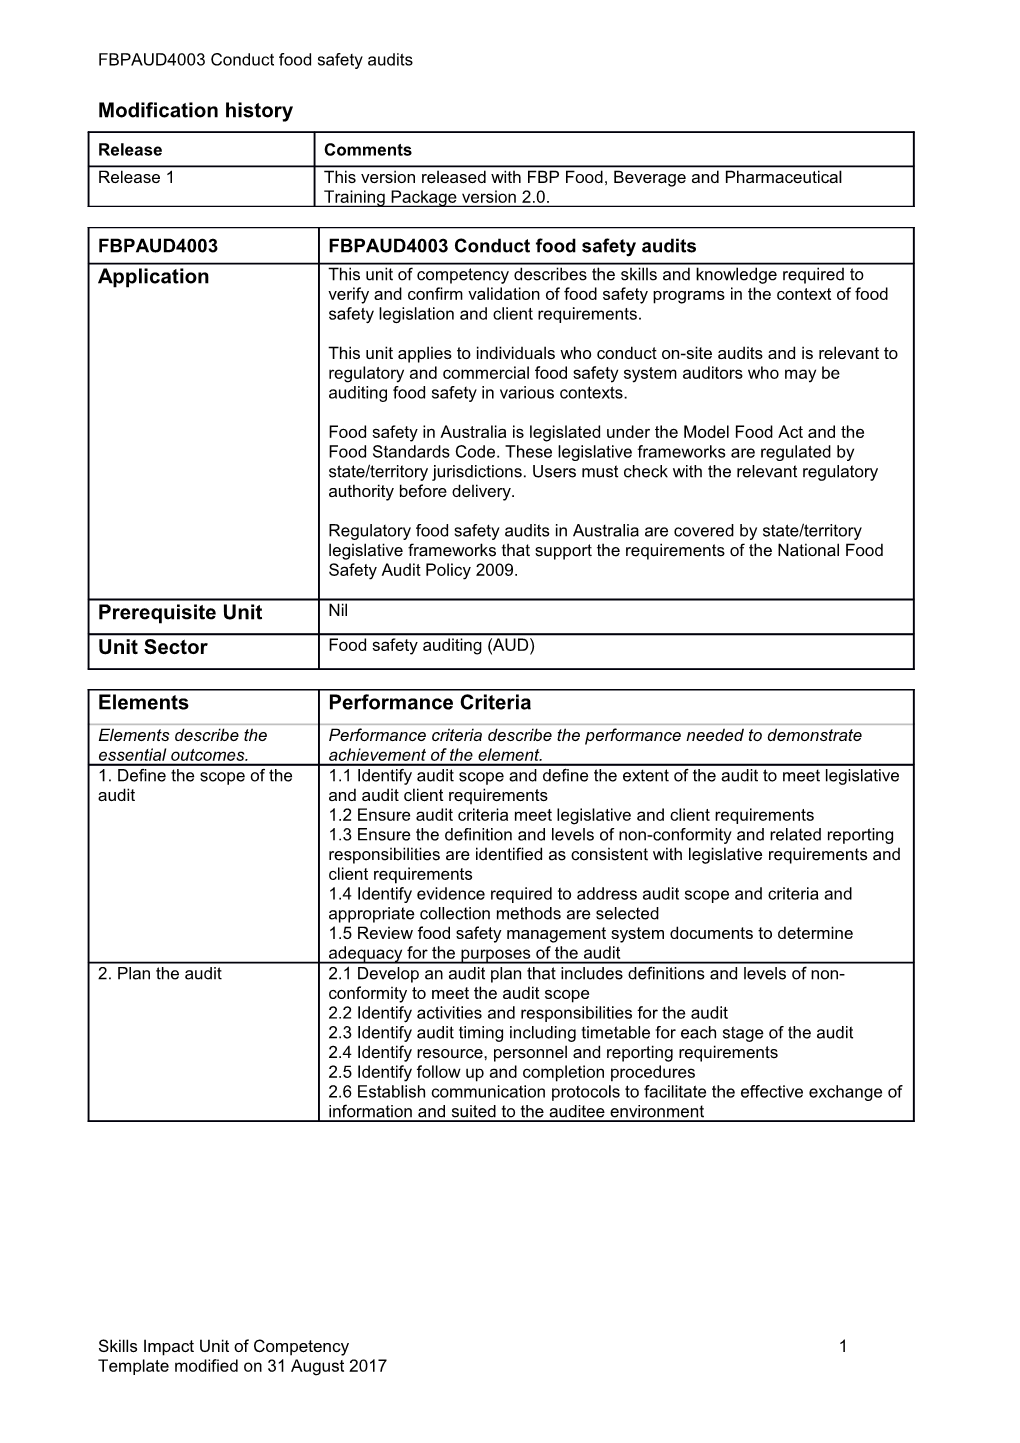 Skills Impact Unit of Competency Template s19